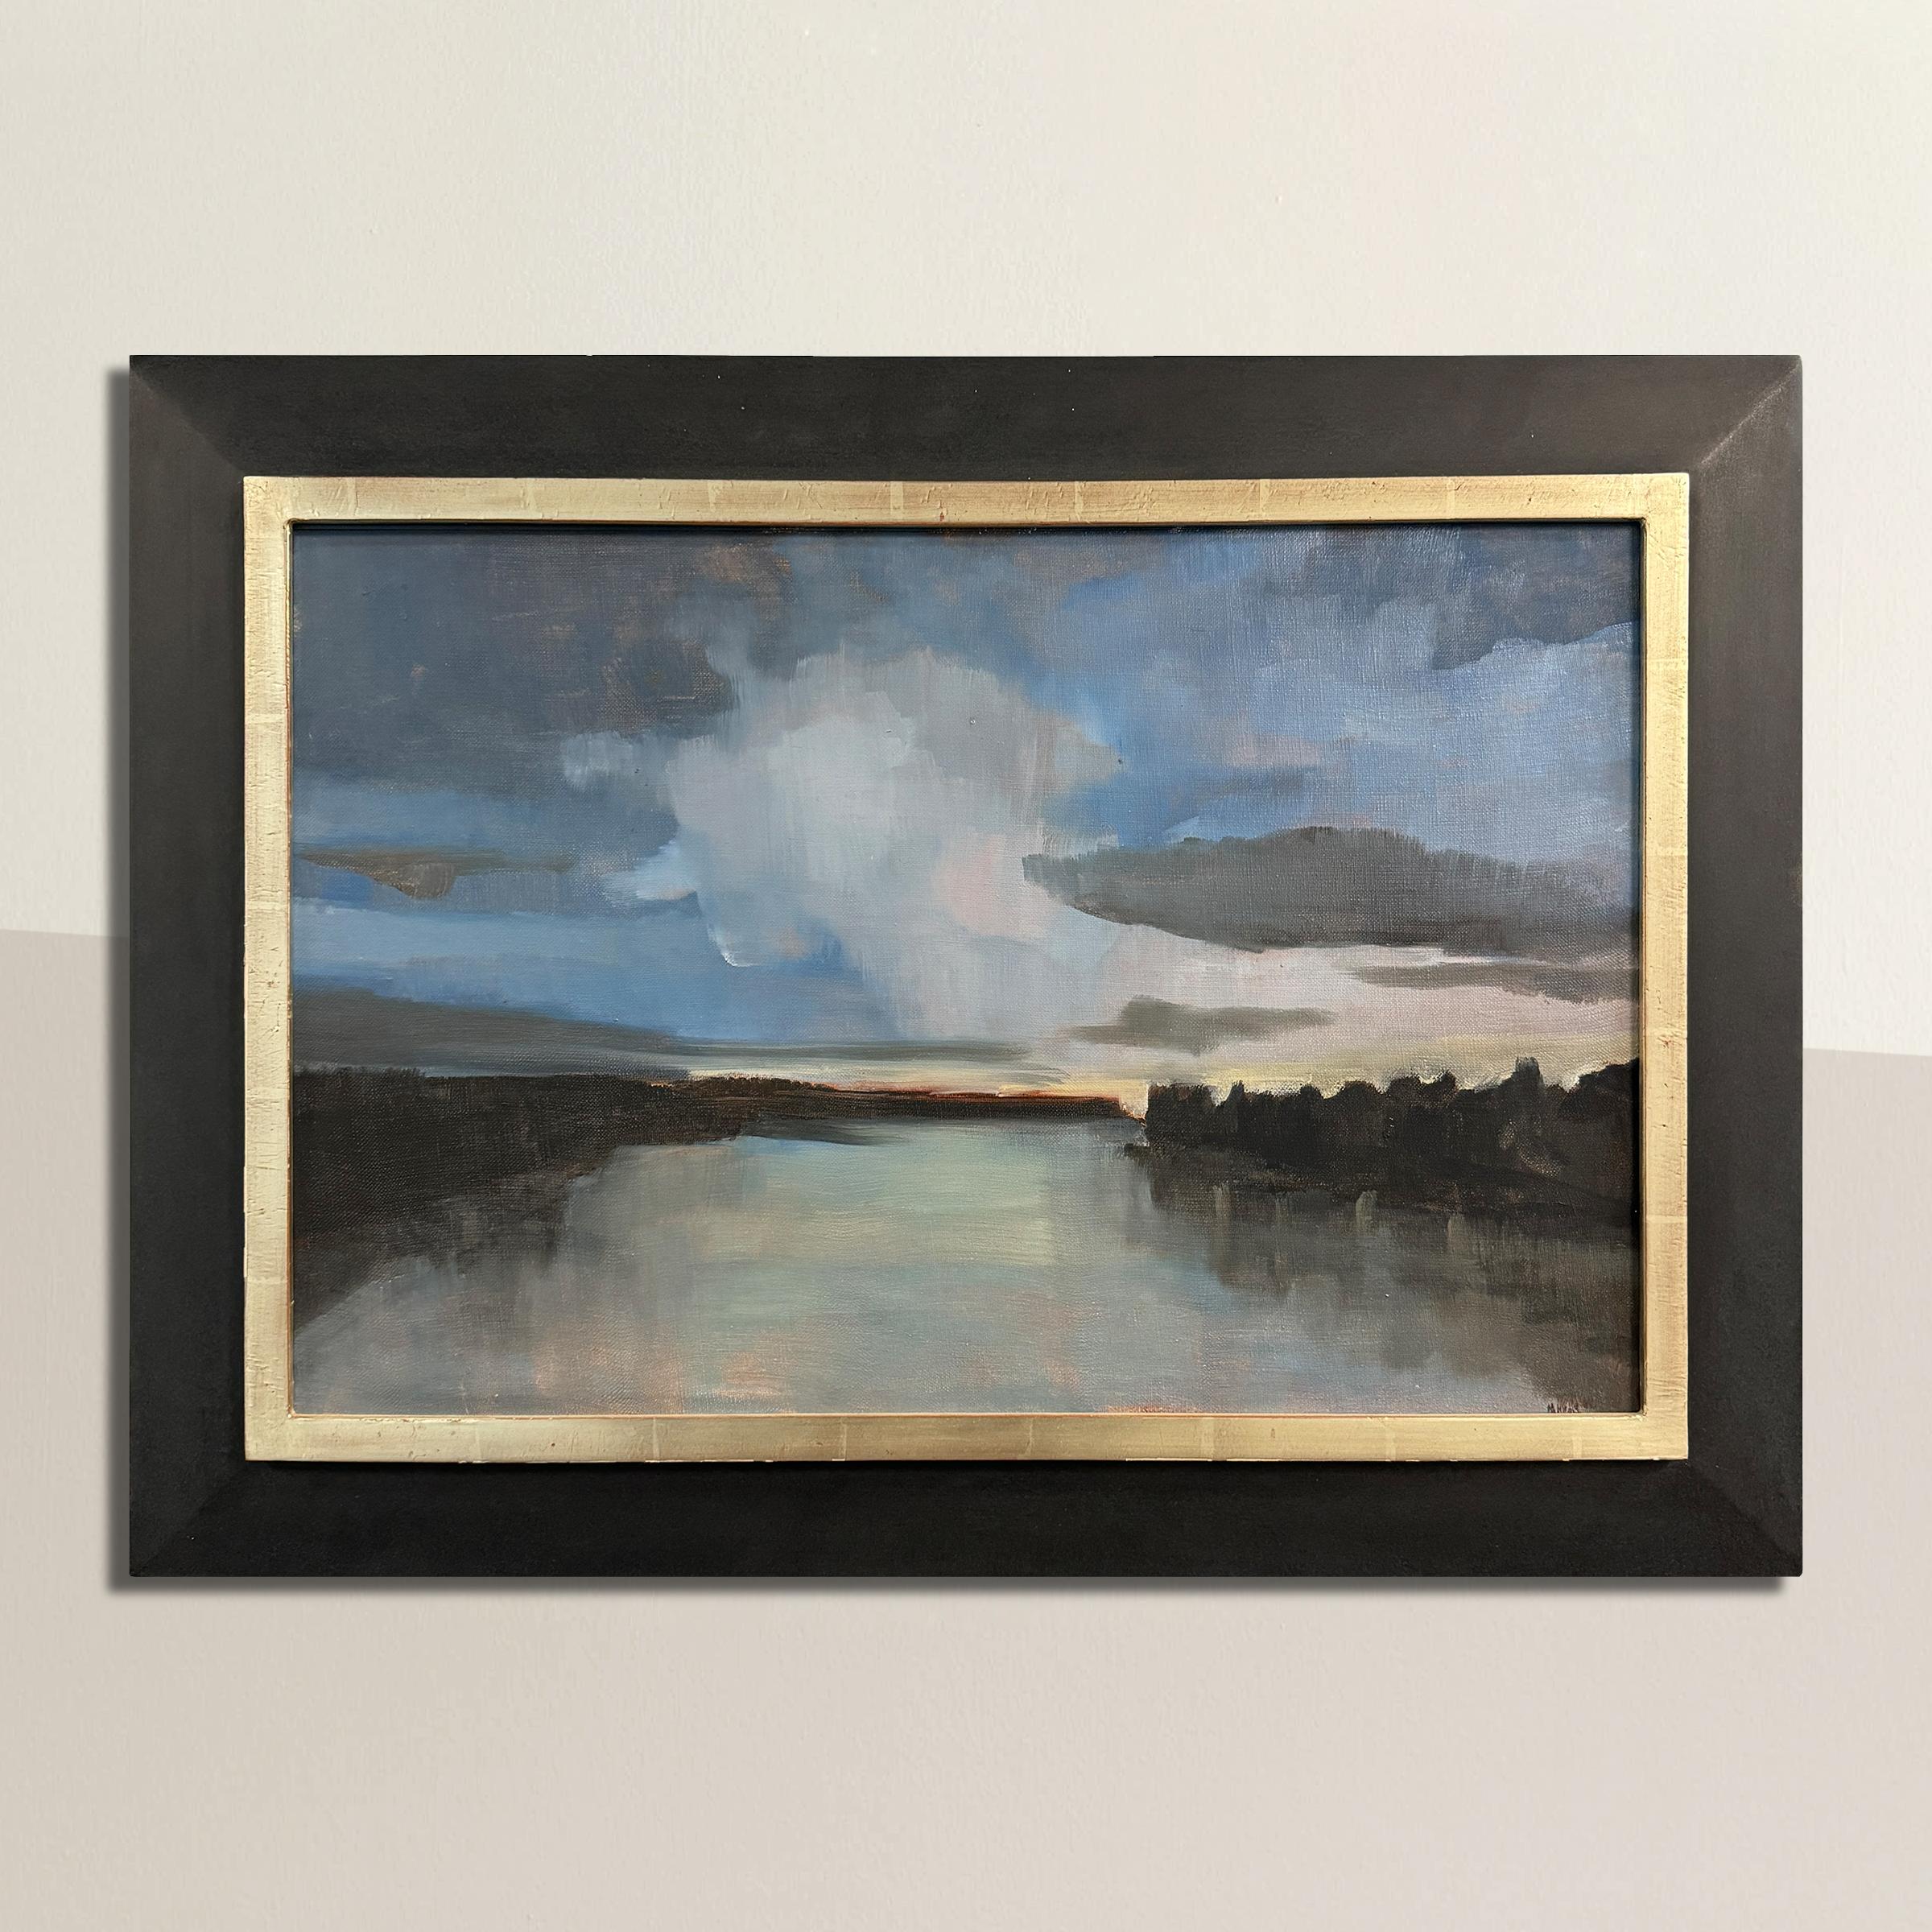 In this Mira Módly's oil on linen masterpiece, the setting sun casts its final golden glow across a tranquil river landscape. Módly's skilled use of scumbling technique in the sky and water adds depth, capturing the fleeting beauty of dusk. The